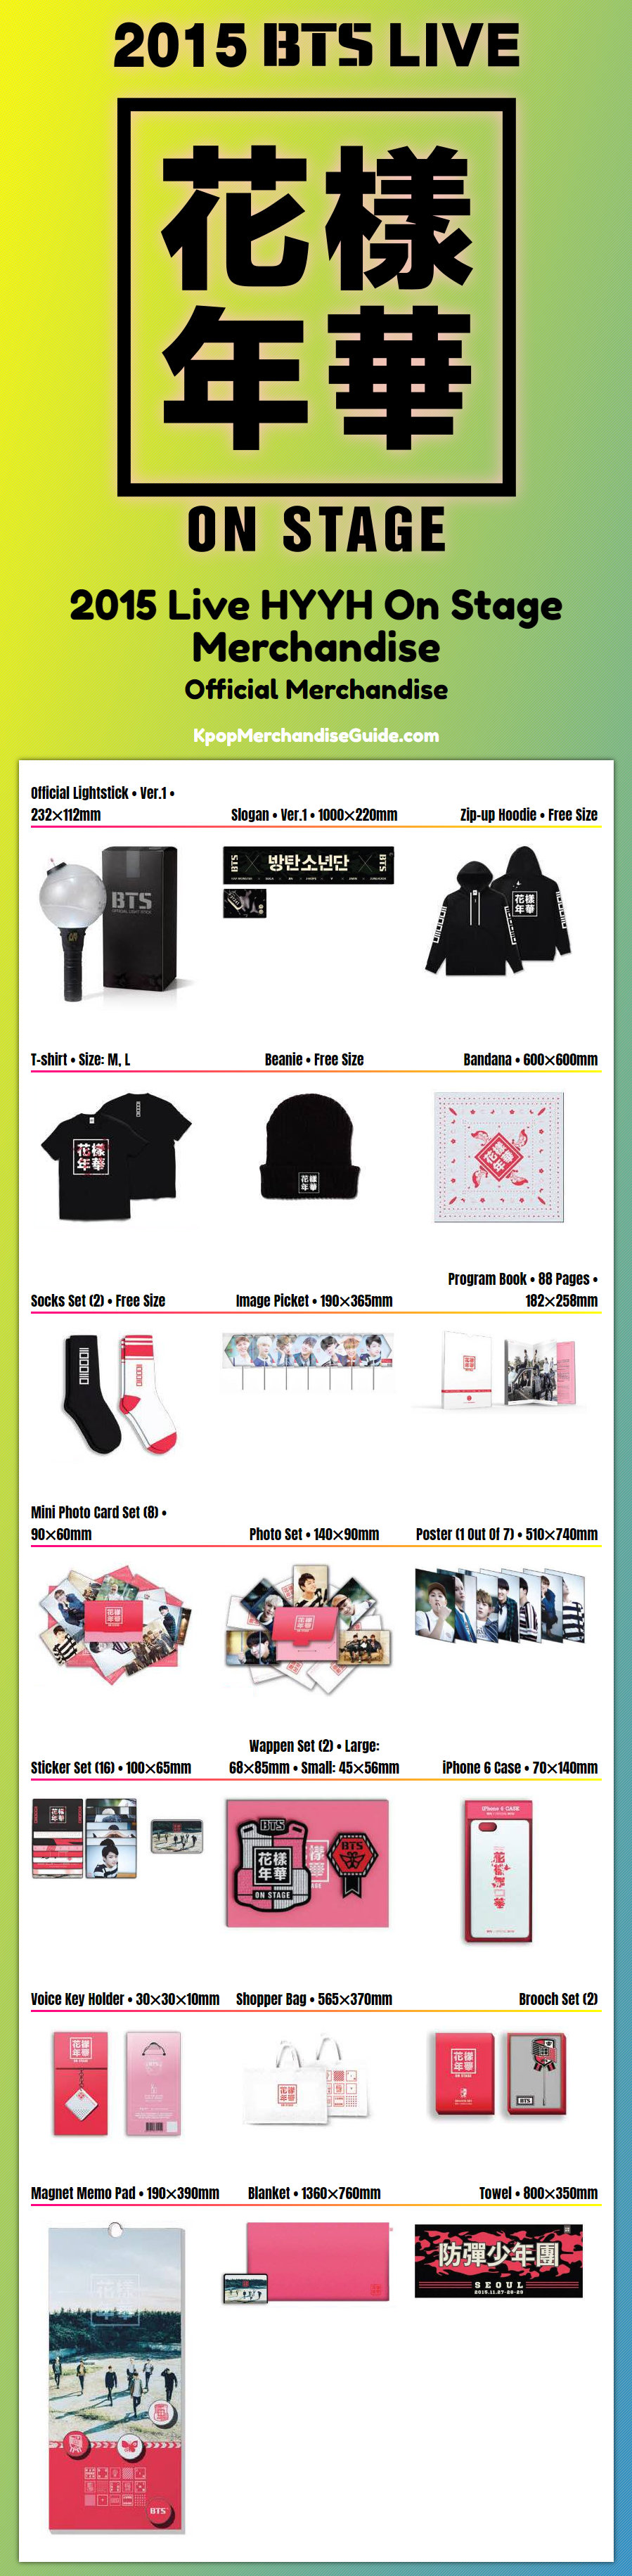 2015 BTS Live <HYYH On Stage> Merchandise